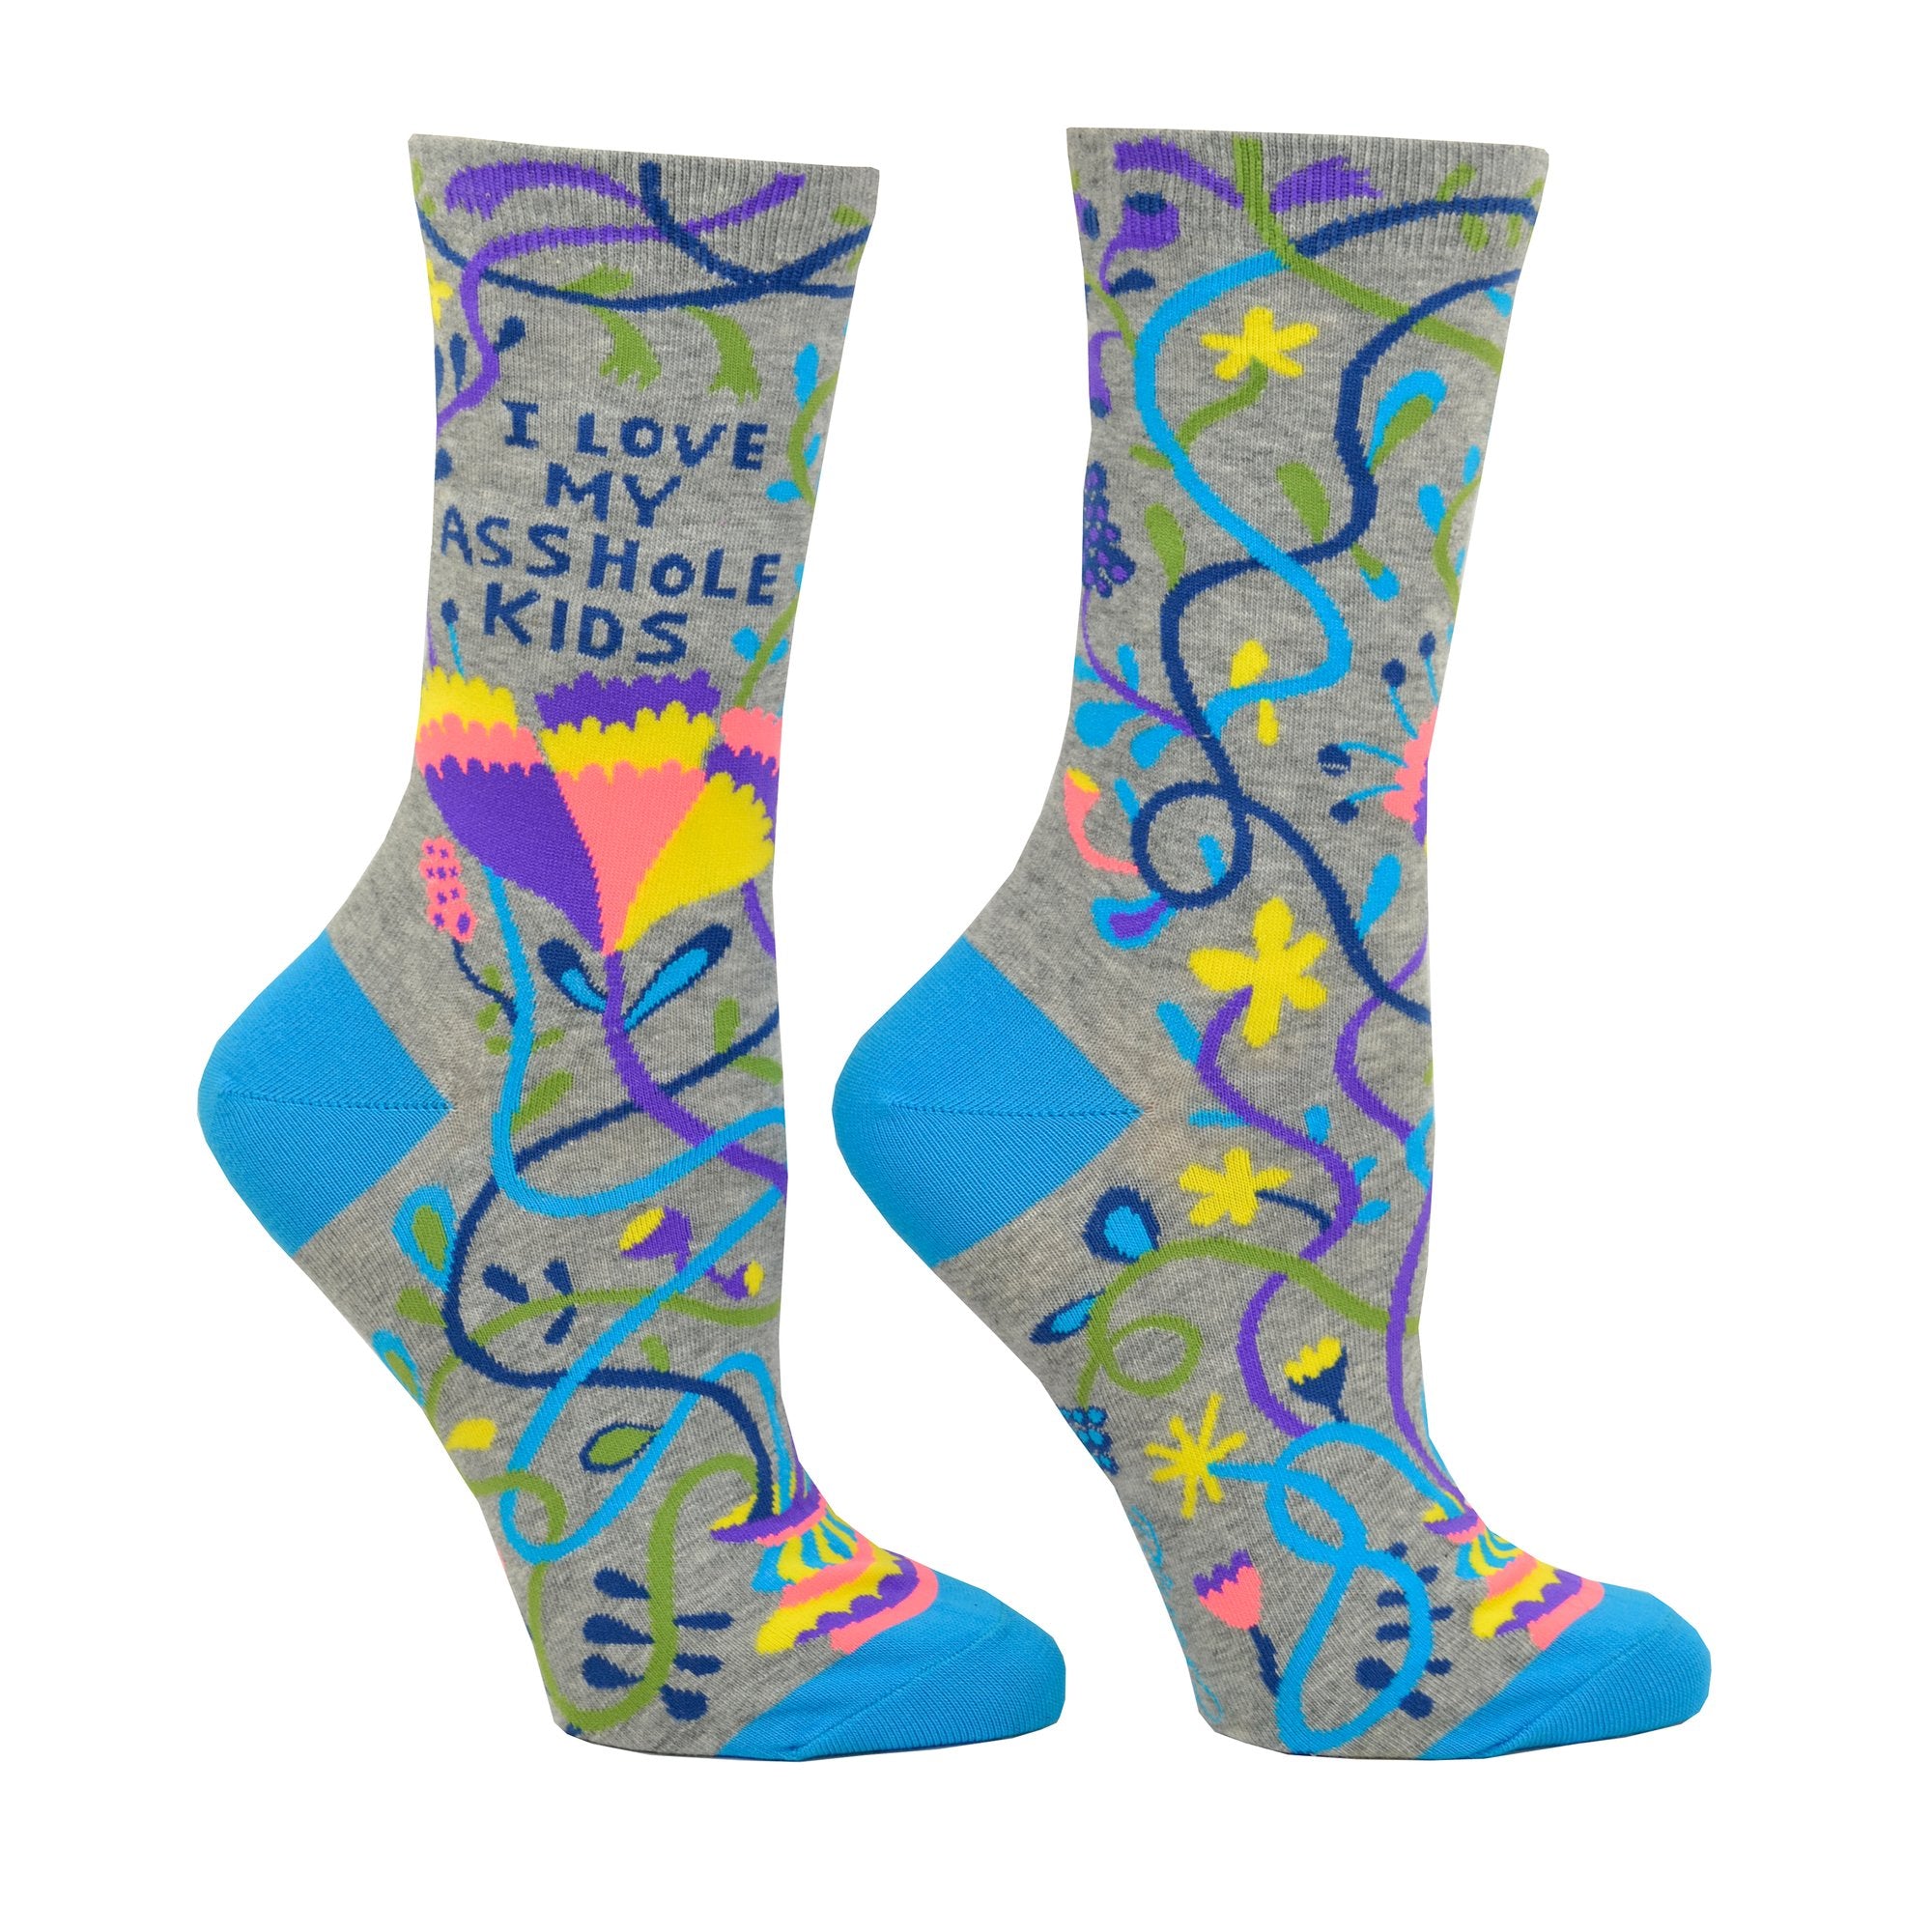 grey socks with multicolour squiggles and flowers and says i love my asshole kids